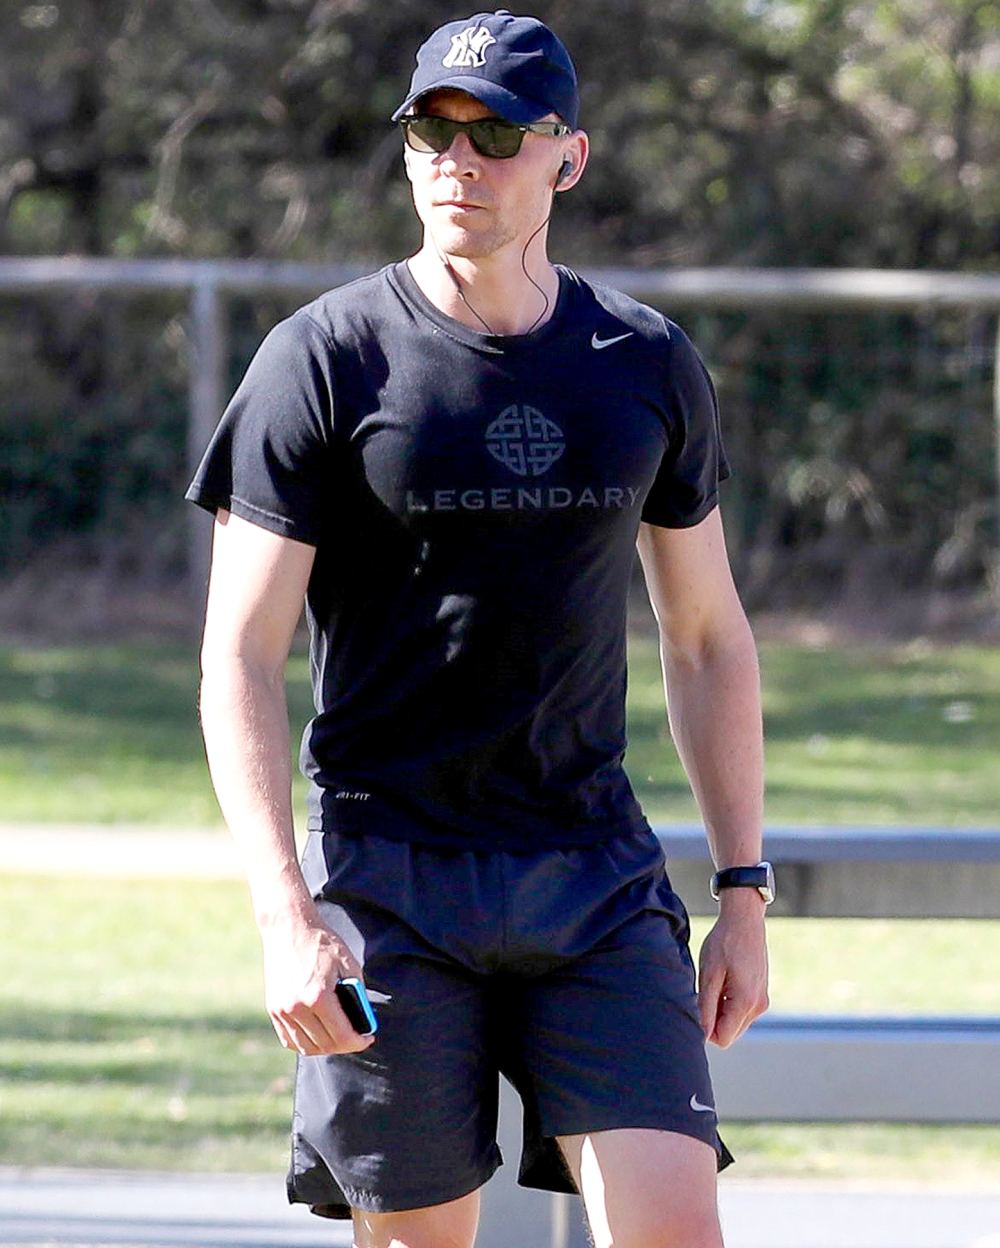 Tom Hiddleston heads back to his hotel to girlfriend Taylor Swift after a jog with his trainer on Broad Beach.